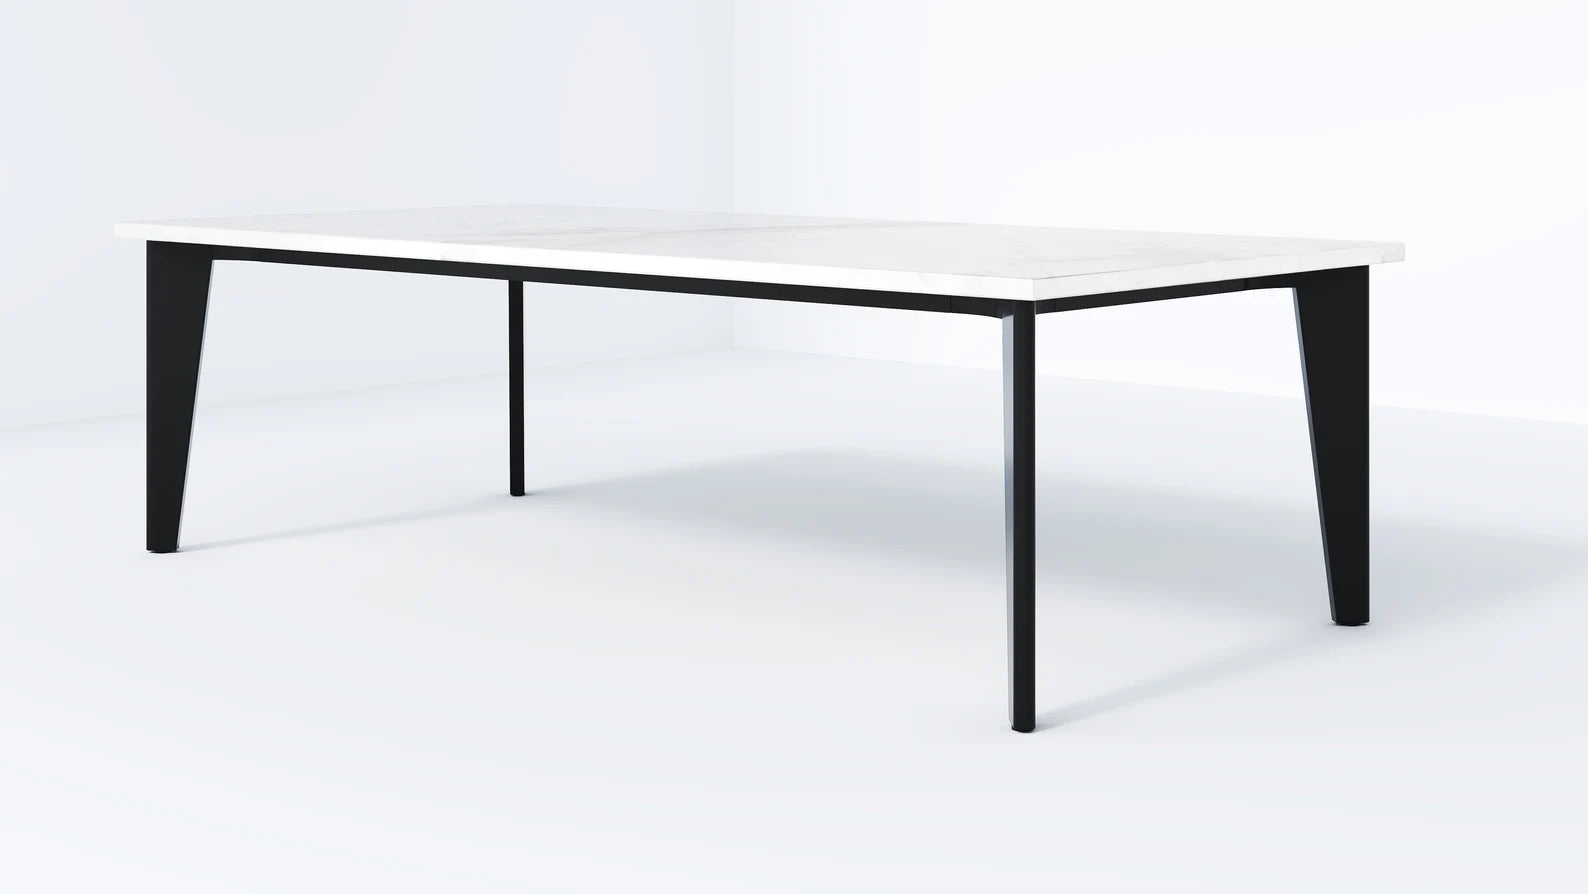 The Artemis Table Frame